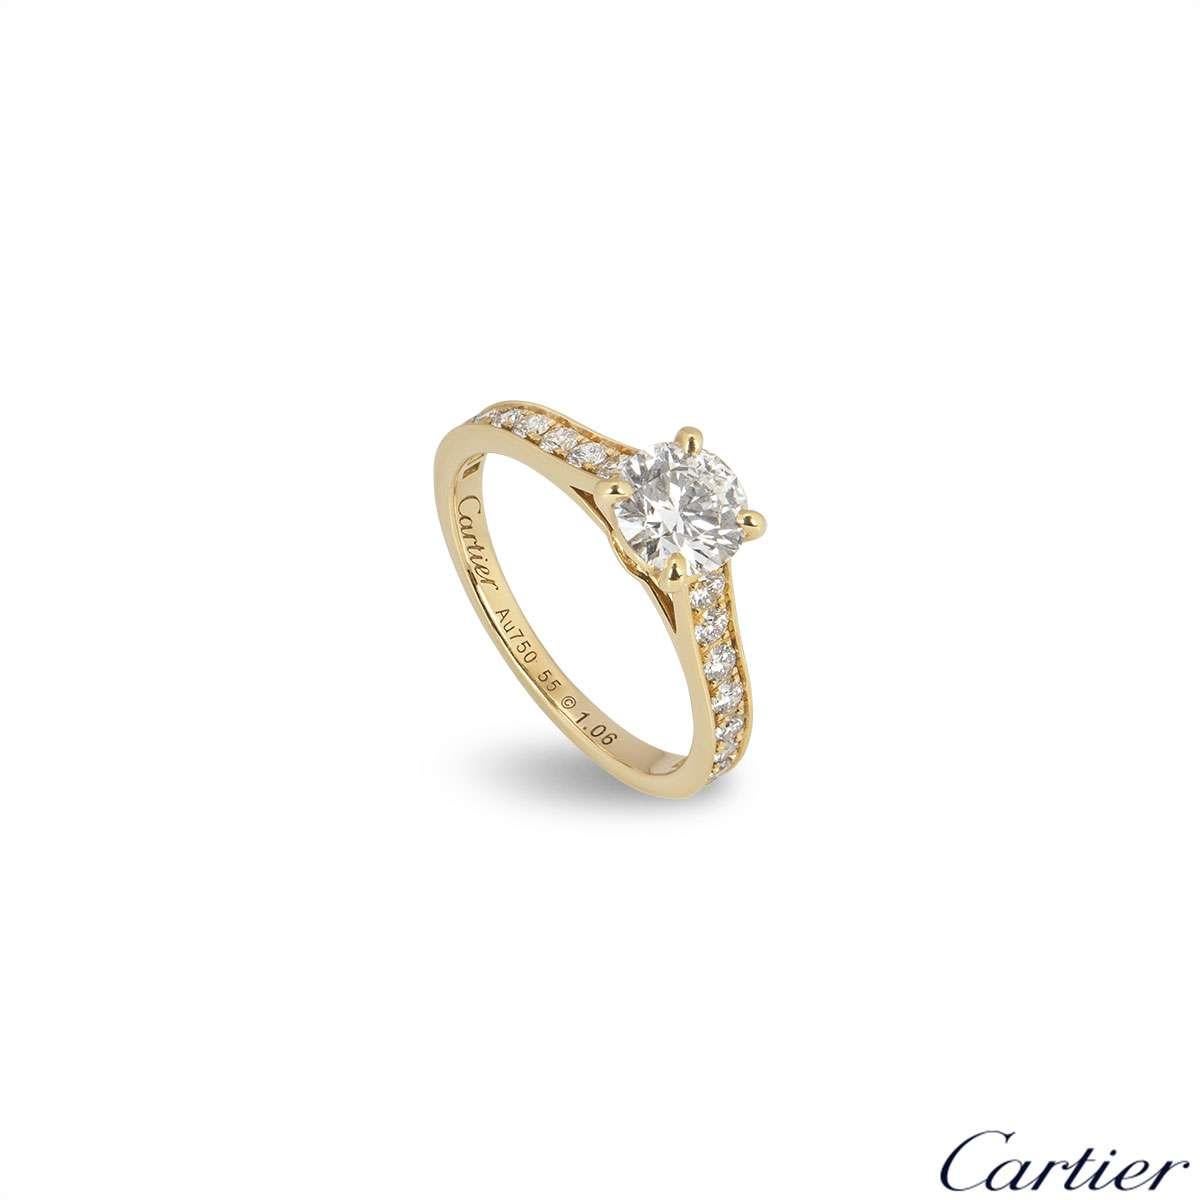 A beautiful 18k yellow gold diamond ring from the Solitaire 1895 collection by Cartier. The ring is set to the centre with a 1.06ct round brilliant cut diamond, H colour and VVS1 in clarity. The diamond scores an excellent rating in all three